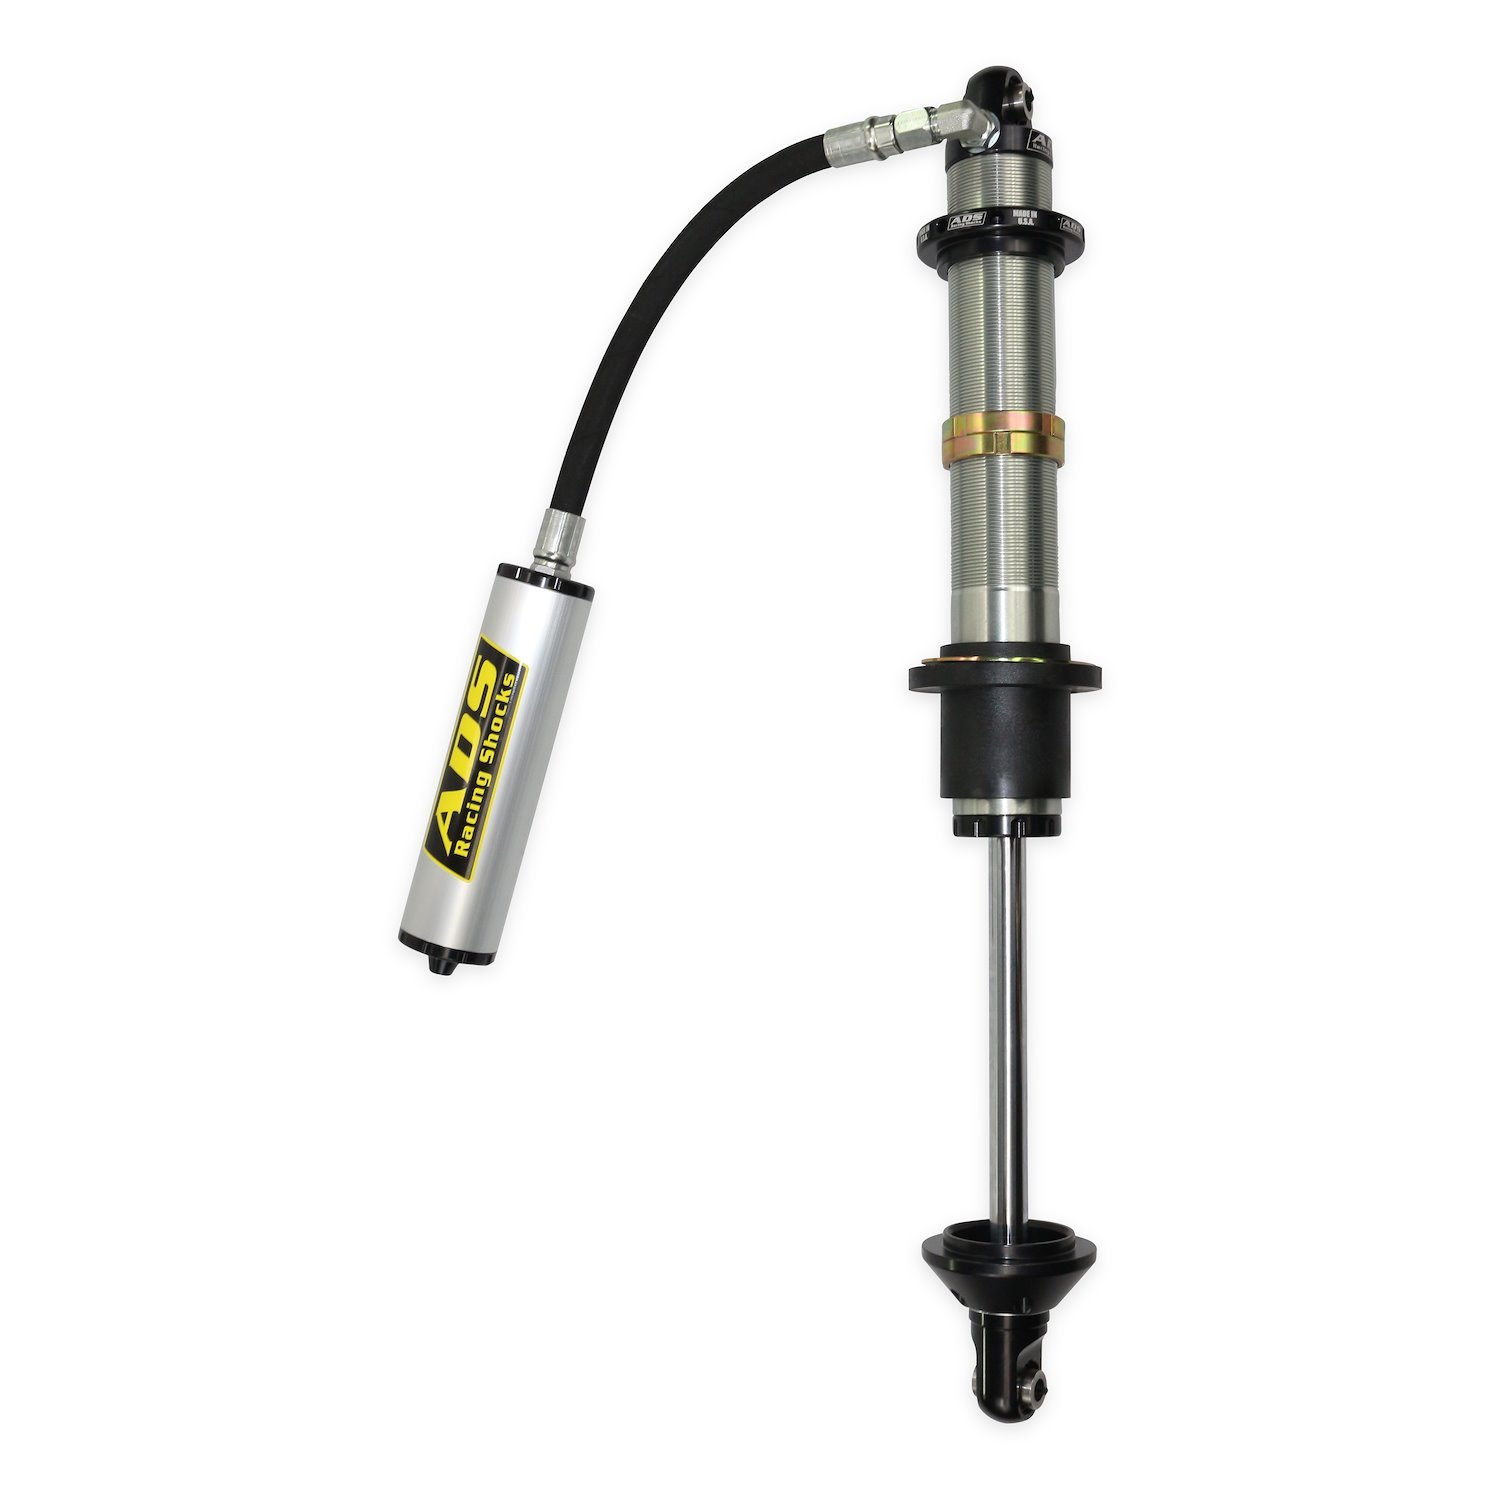 250-COR14-900 Coil-Over Race Shock, 2.5 in. x 14 in. Stroke, w/ Remote Reservoir (90-Degree Hose)